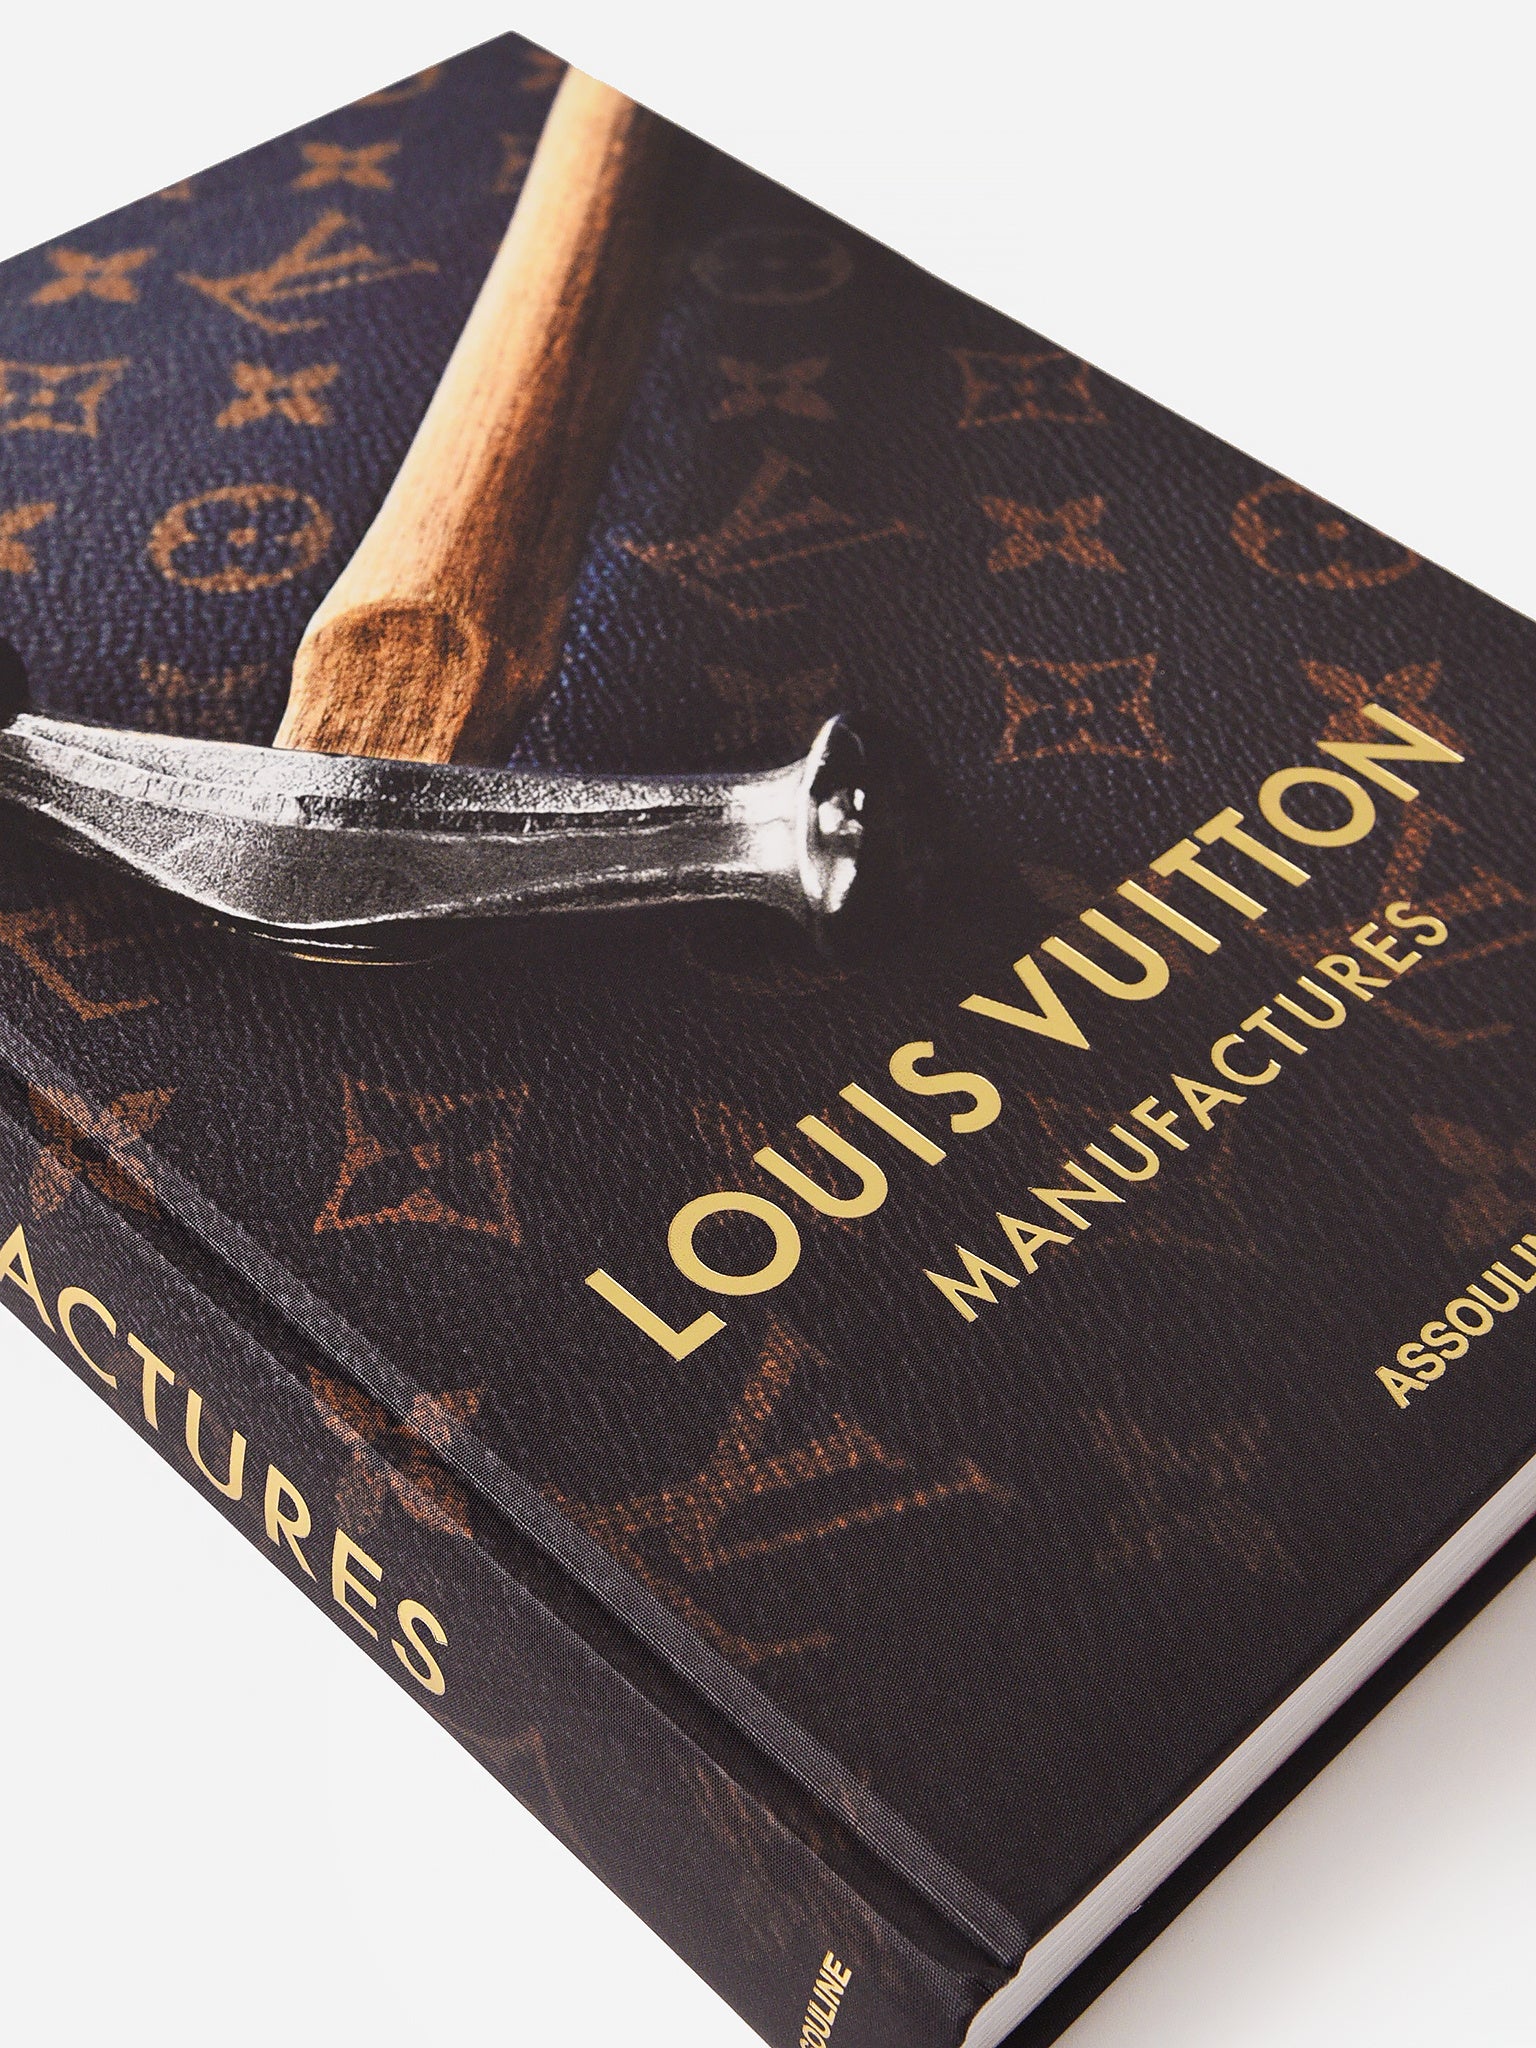 Louis Vuitton Manufactures - Assouline Coffee Table Book